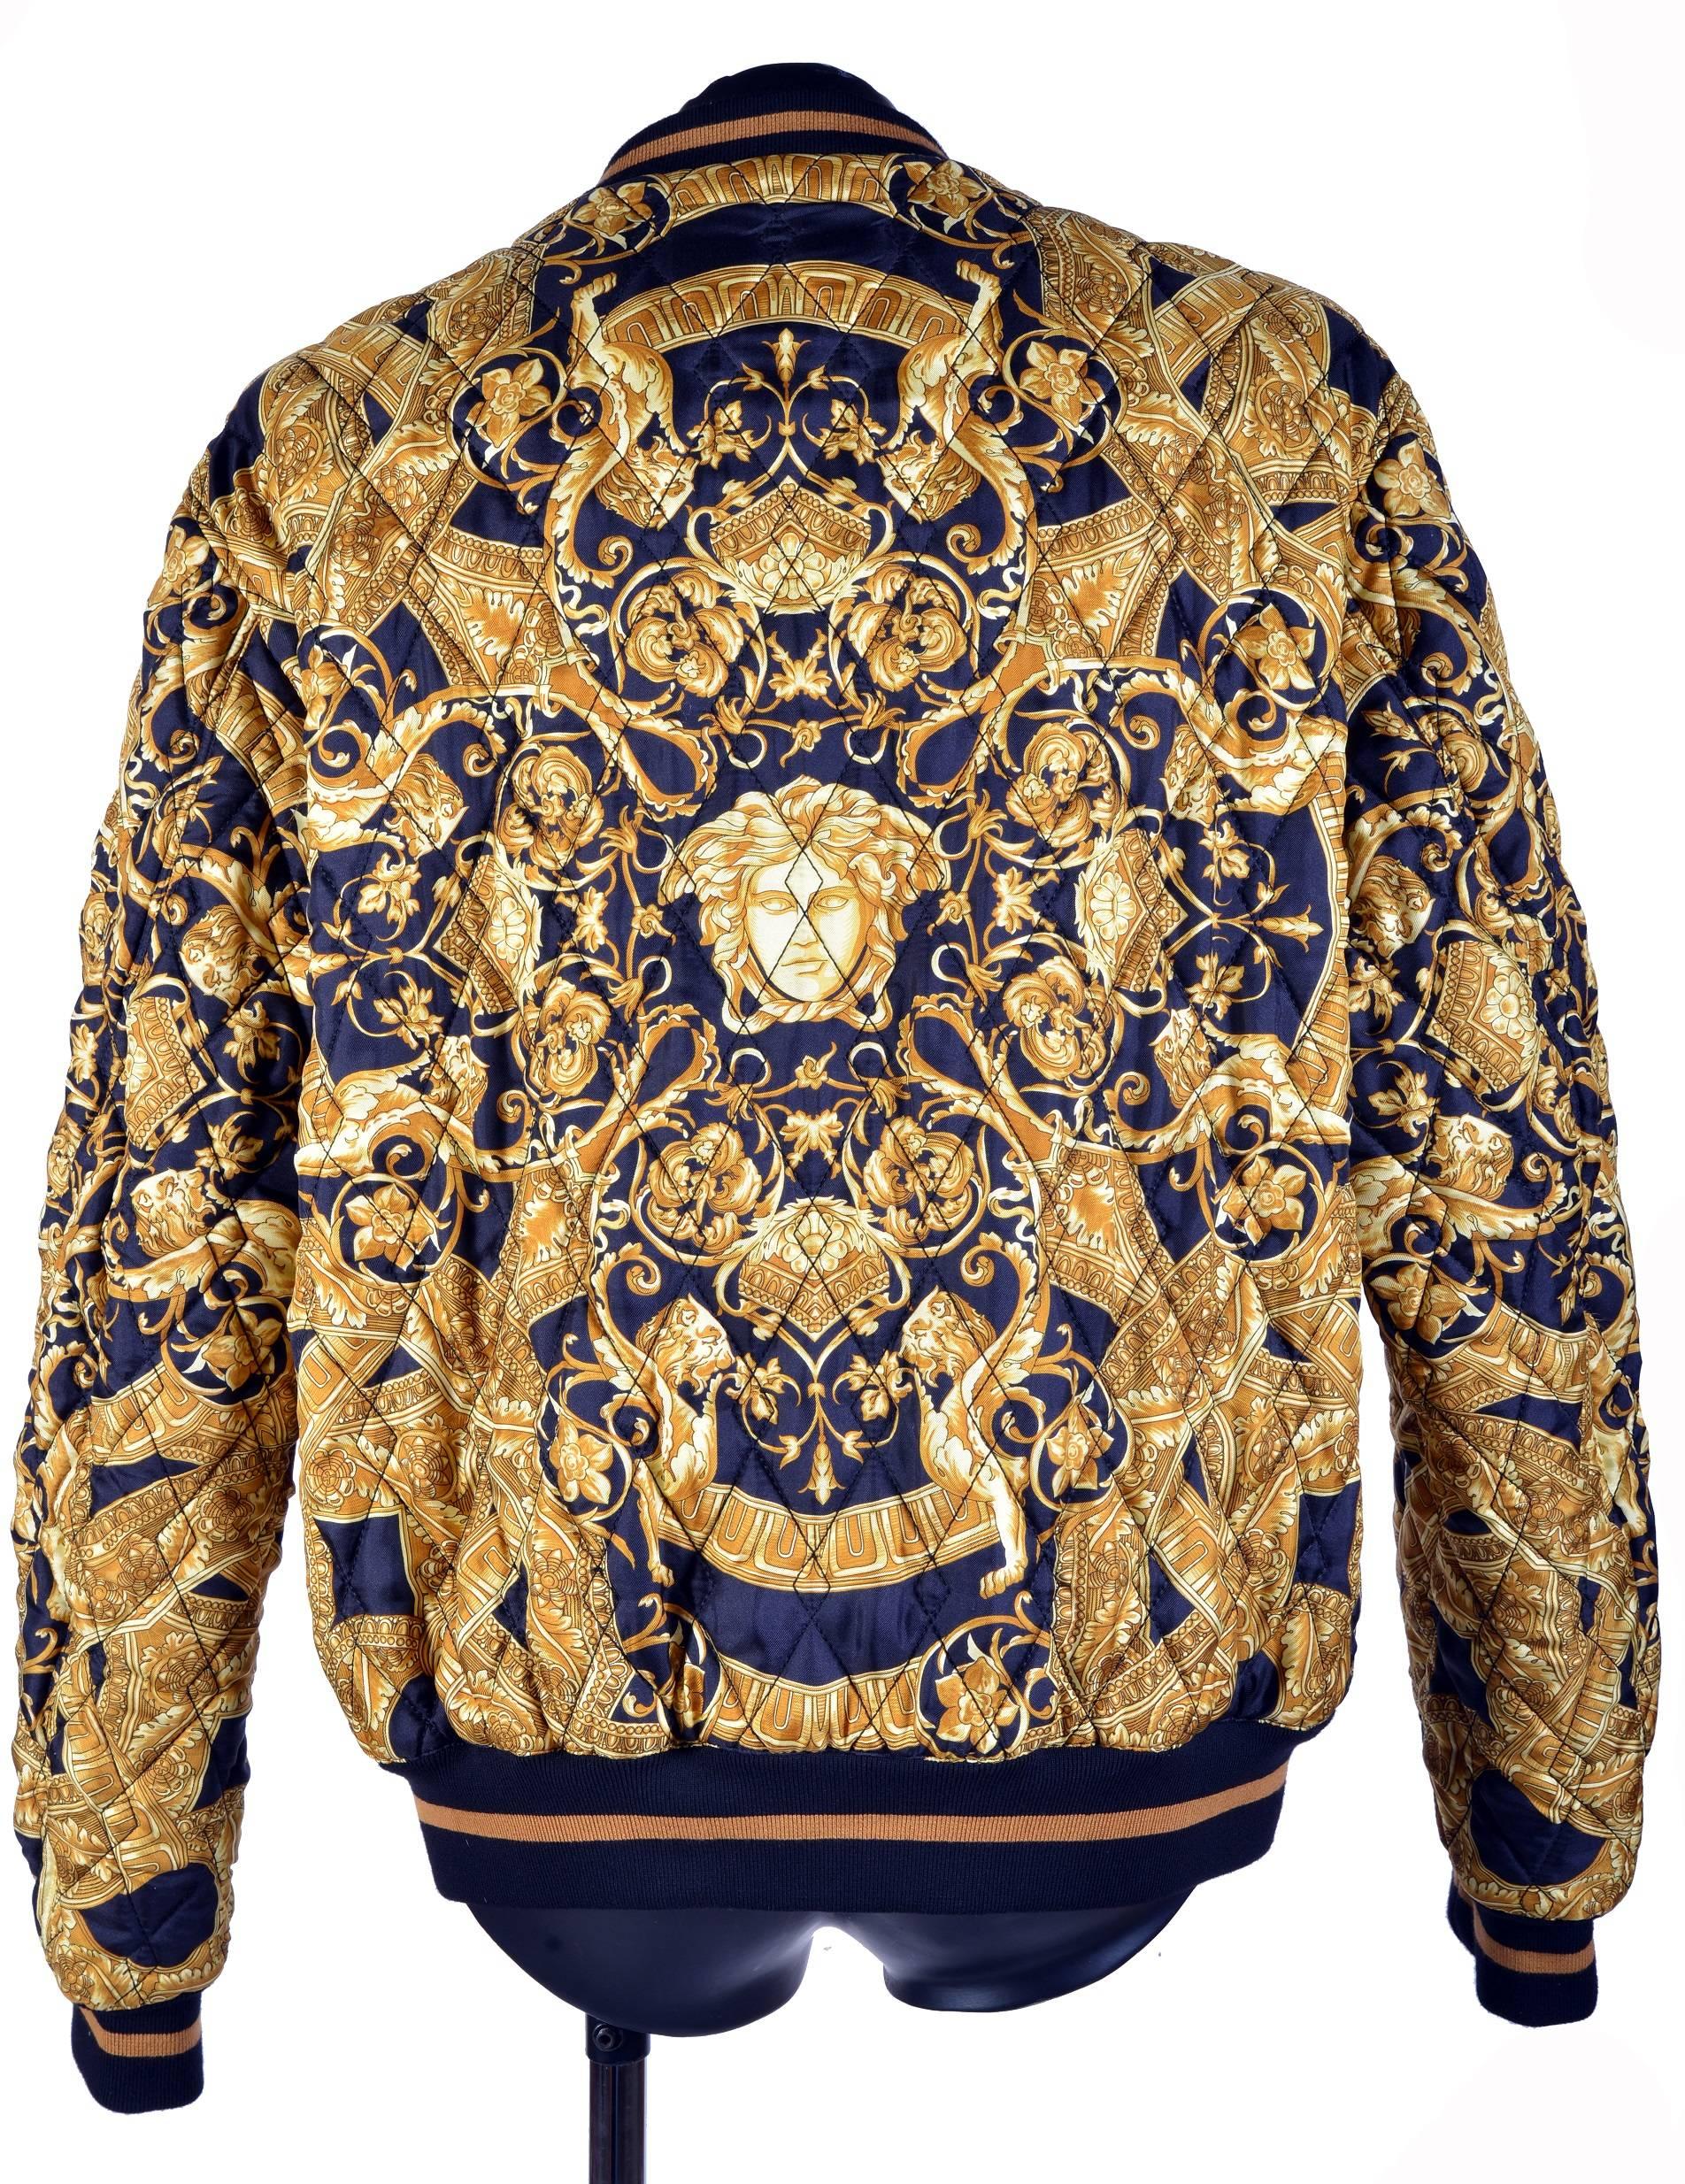 VERSACE BOMBER JACKET

FROM 
35th Anniversary Special Project Collection!

The collection was sold out instantly all over the world!

This bomber jacket from Versace featuring iconic print on quilted 100% silk, cotton ribbed neck, hem and